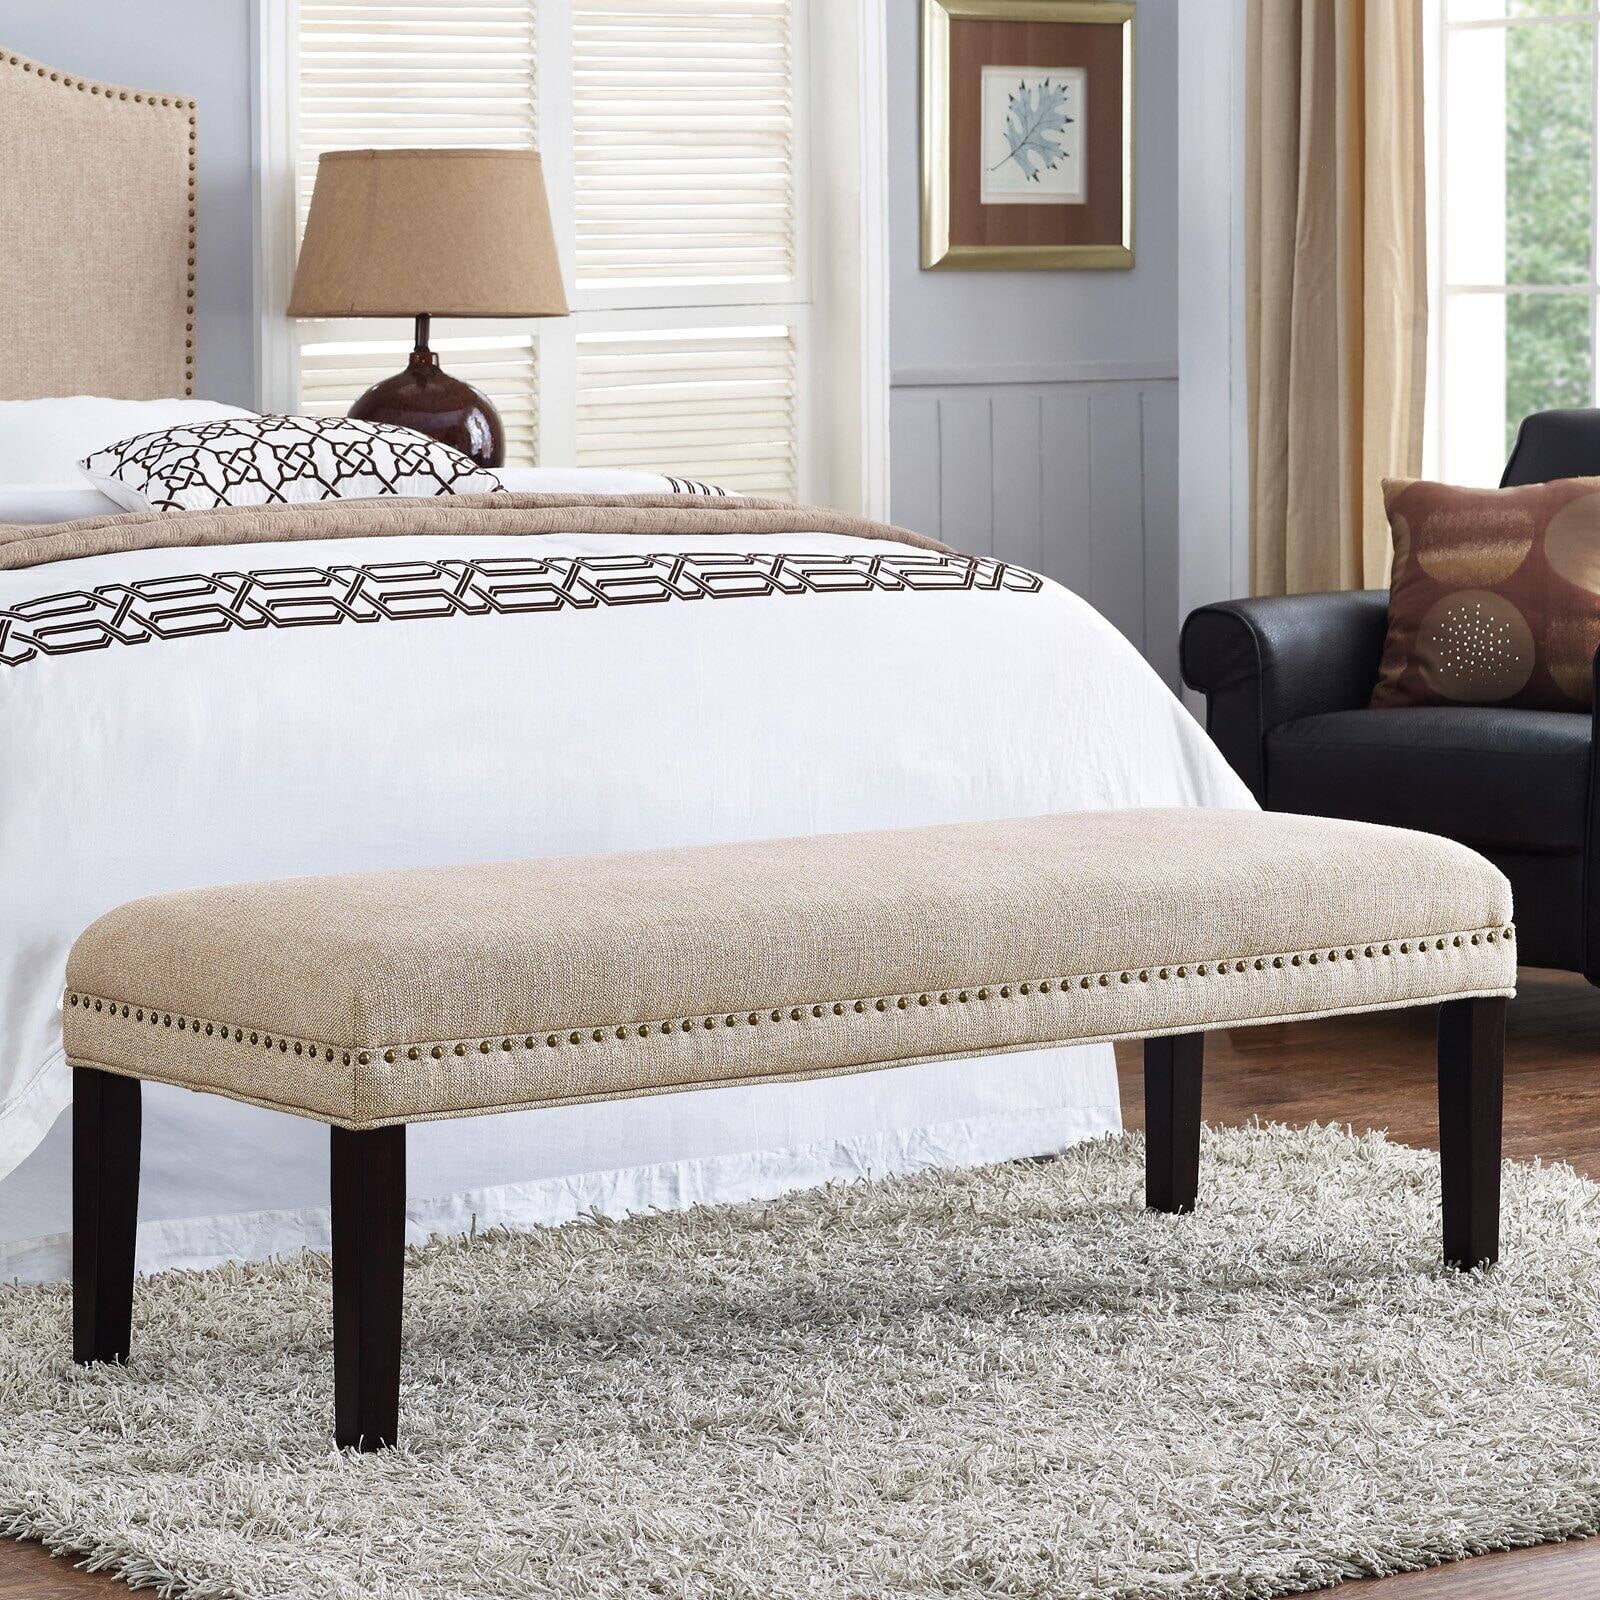 The Beauty And Functionality Of A Bedroom Upholstered Bench